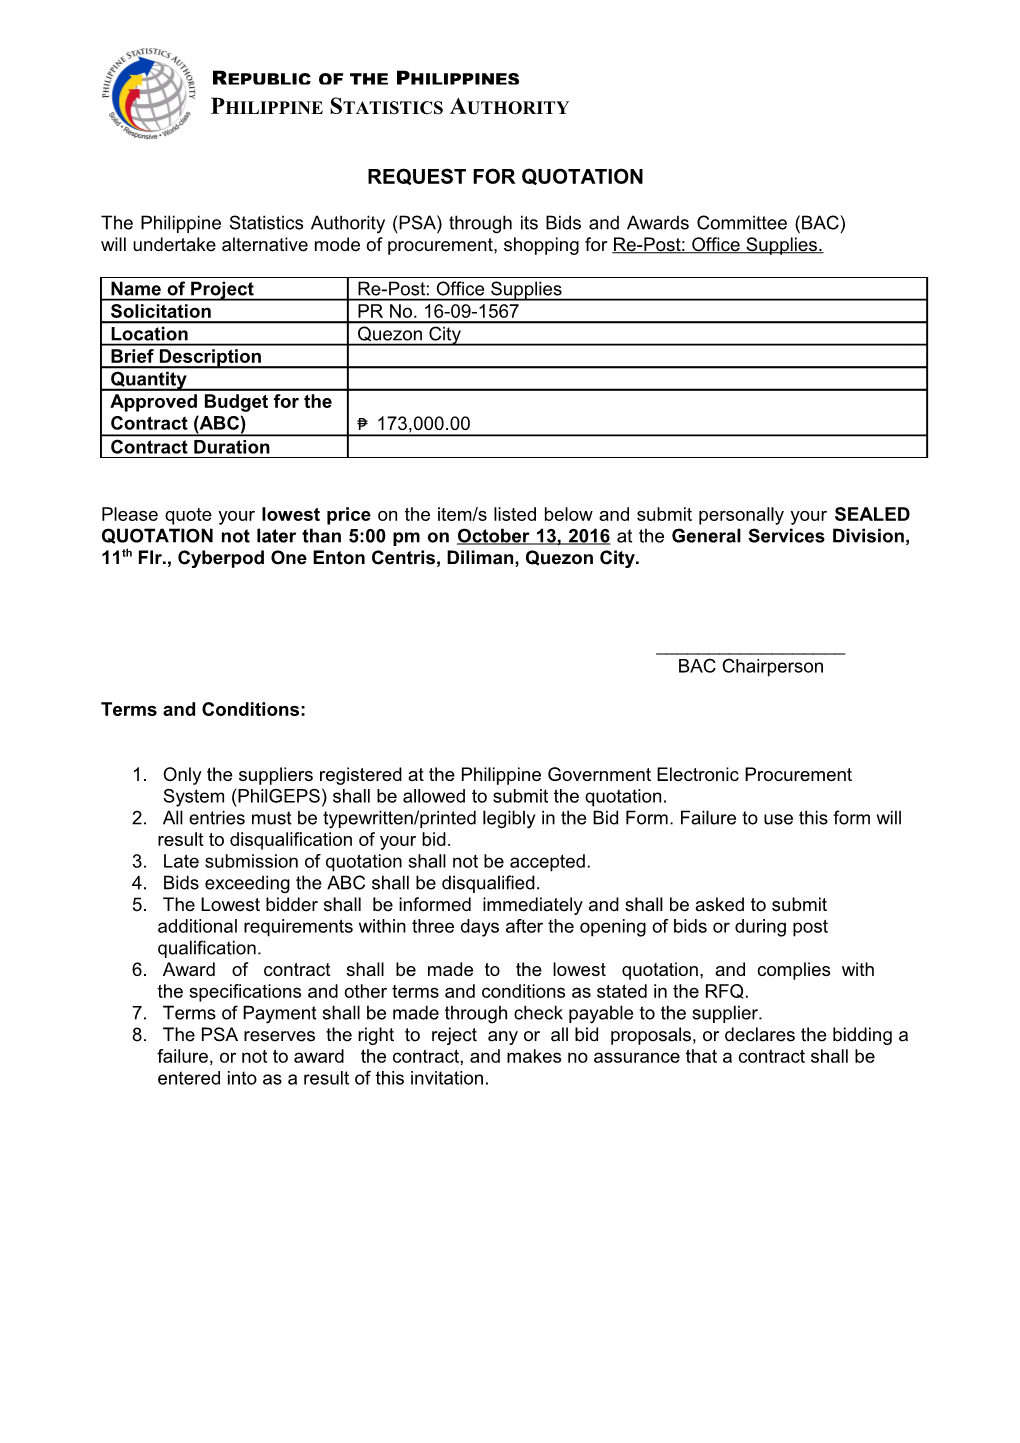 Request for Quotation s29